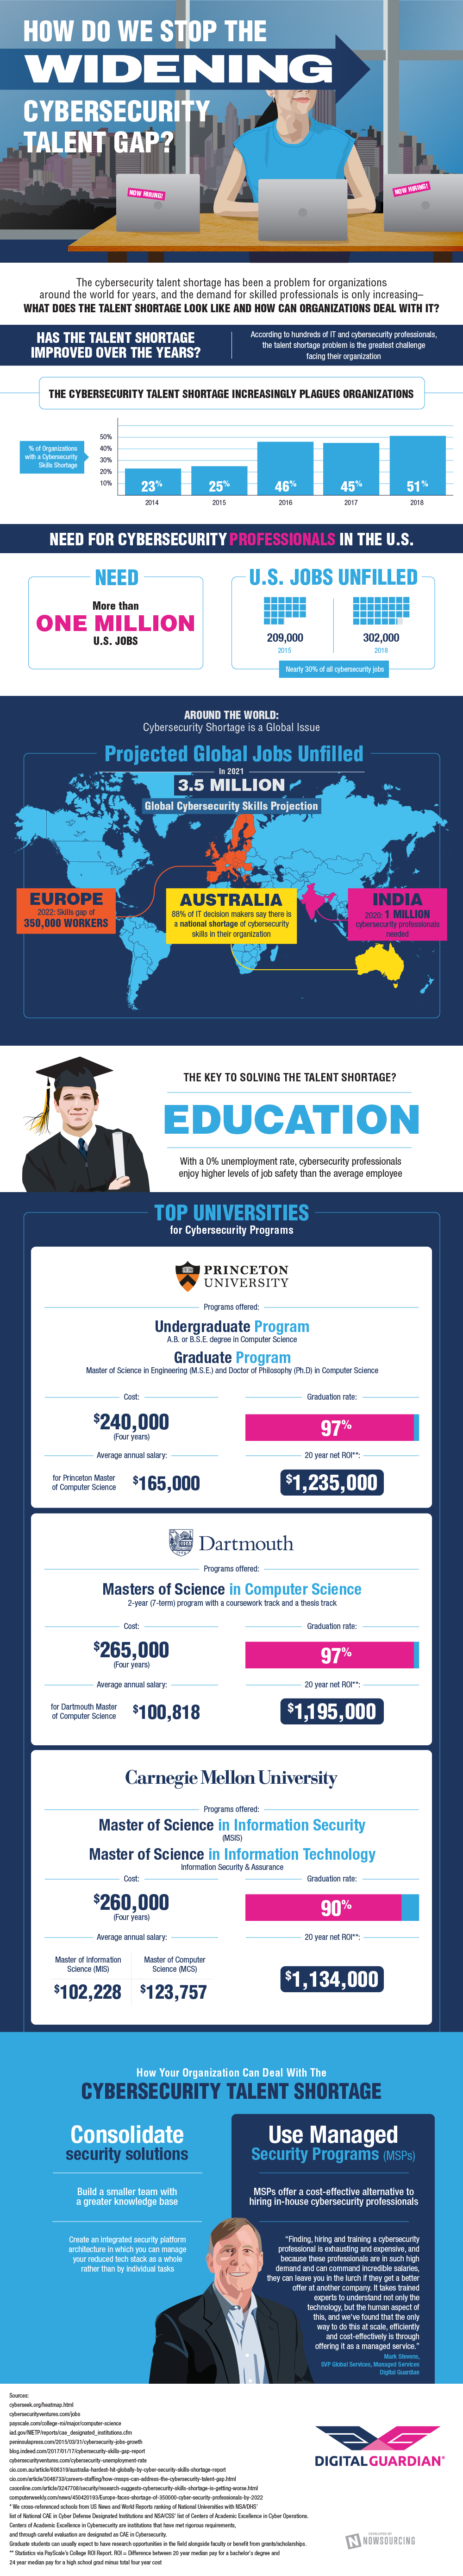 How Do We Stop the Widening Cybersecurity Gap? There is currently a 0% unemployment rate among cybersecurity professionals, and the industry is hundreds of thousands of people short in the United States alone. This infographic outlines the scope of the problem as well as some of the top college programs to help fill the gap.